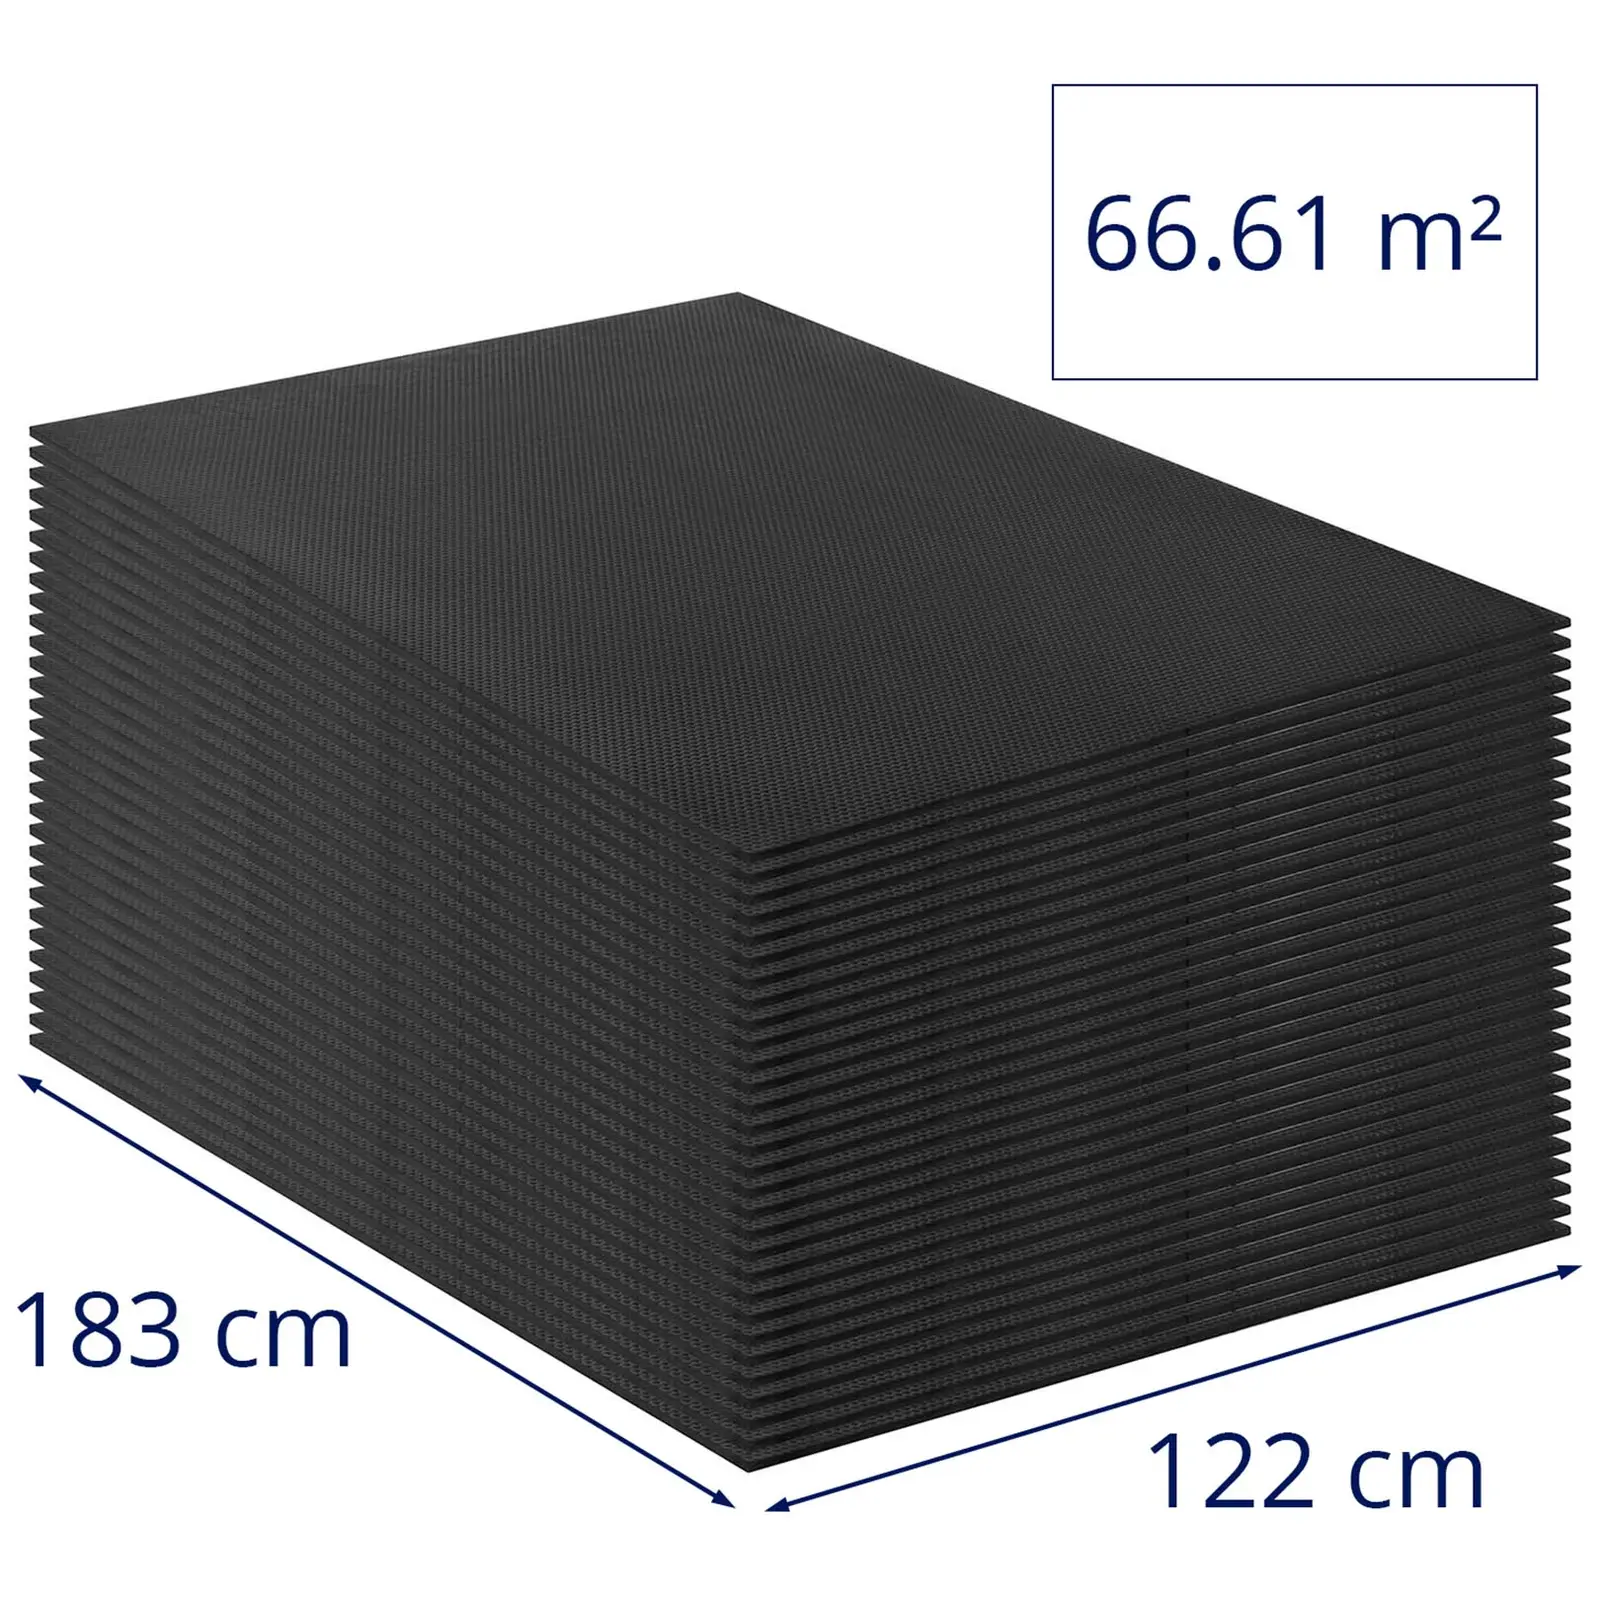 Stable Mats - set of 30 - with drainage studs - 1830 x 1220 mm - 66.9 m²